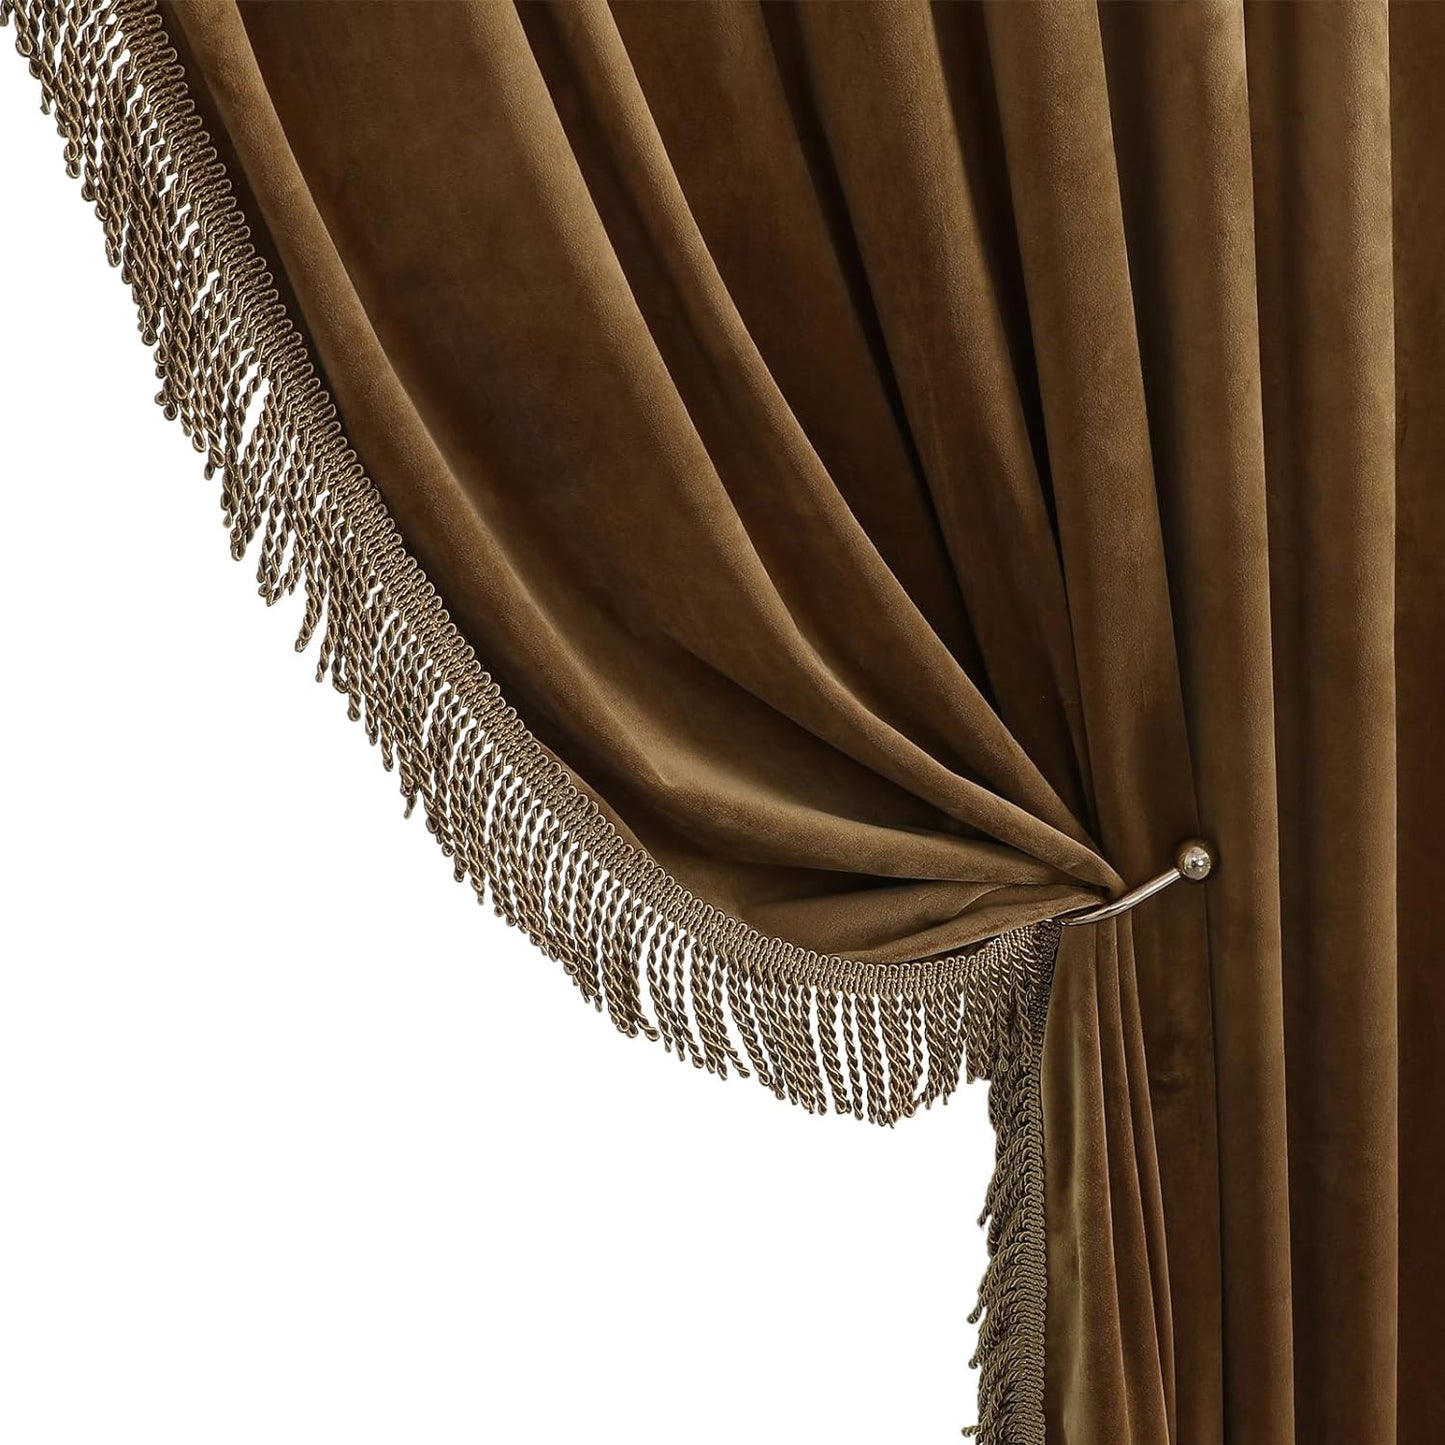 Benedeco Green Velvet Curtains for Bedroom Window, Super Soft Luxury Drapes, Room Darkening Thermal Insulated Rod Pocket Curtain for Living Room, W52 by L84 Inches, 2 Panels  Benedeco Goldbrown-Tassel W52 * L63 | 2 Panels 